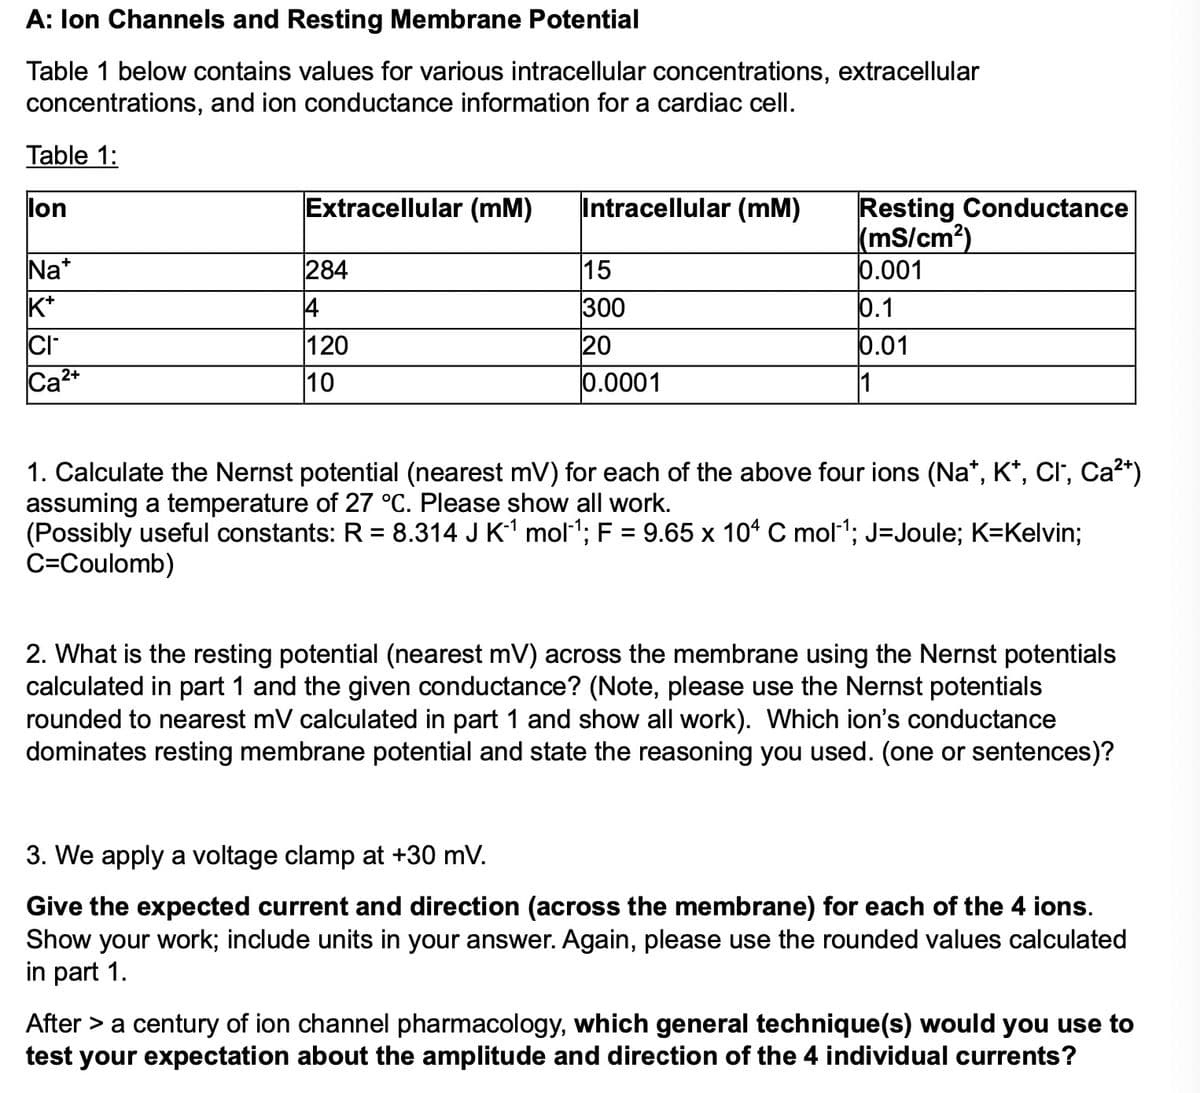 A: Ion Channels and Resting Membrane Potential
Table 1 below contains values for various intracellular concentrations, extracellular
concentrations, and ion conductance information for a cardiac cell.
Table 1:
lon
Extracellular (mM)
Na*
284
K+
4
CI
Ca2+
120
10
Intracellular (mM)
Resting Conductance
(mS/cm²)
15
0.001
300
0.1
20
0.01
0.0001
1
1. Calculate the Nernst potential (nearest mV) for each of the above four ions (Na*, K*, Cl, Ca²+)
assuming a temperature of 27 °C. Please show all work.
(Possibly useful constants: R = 8.314 J K 1 mol‍¹; F = 9.65 x 104 C mol¹; J=Joule; K=Kelvin;
C=Coulomb)
2. What is the resting potential (nearest mV) across the membrane using the Nernst potentials
calculated in part 1 and the given conductance? (Note, please use the Nernst potentials
rounded to nearest mV calculated in part 1 and show all work). Which ion's conductance
dominates resting membrane potential and state the reasoning you used. (one or sentences)?
3. We apply a voltage clamp at +30 mV.
Give the expected current and direction (across the membrane) for each of the 4 ions.
Show your work; include units in your answer. Again, please use the rounded values calculated
in part 1.
After > a century of ion channel pharmacology, which general technique(s) would you use to
test your expectation about the amplitude and direction of the 4 individual currents?